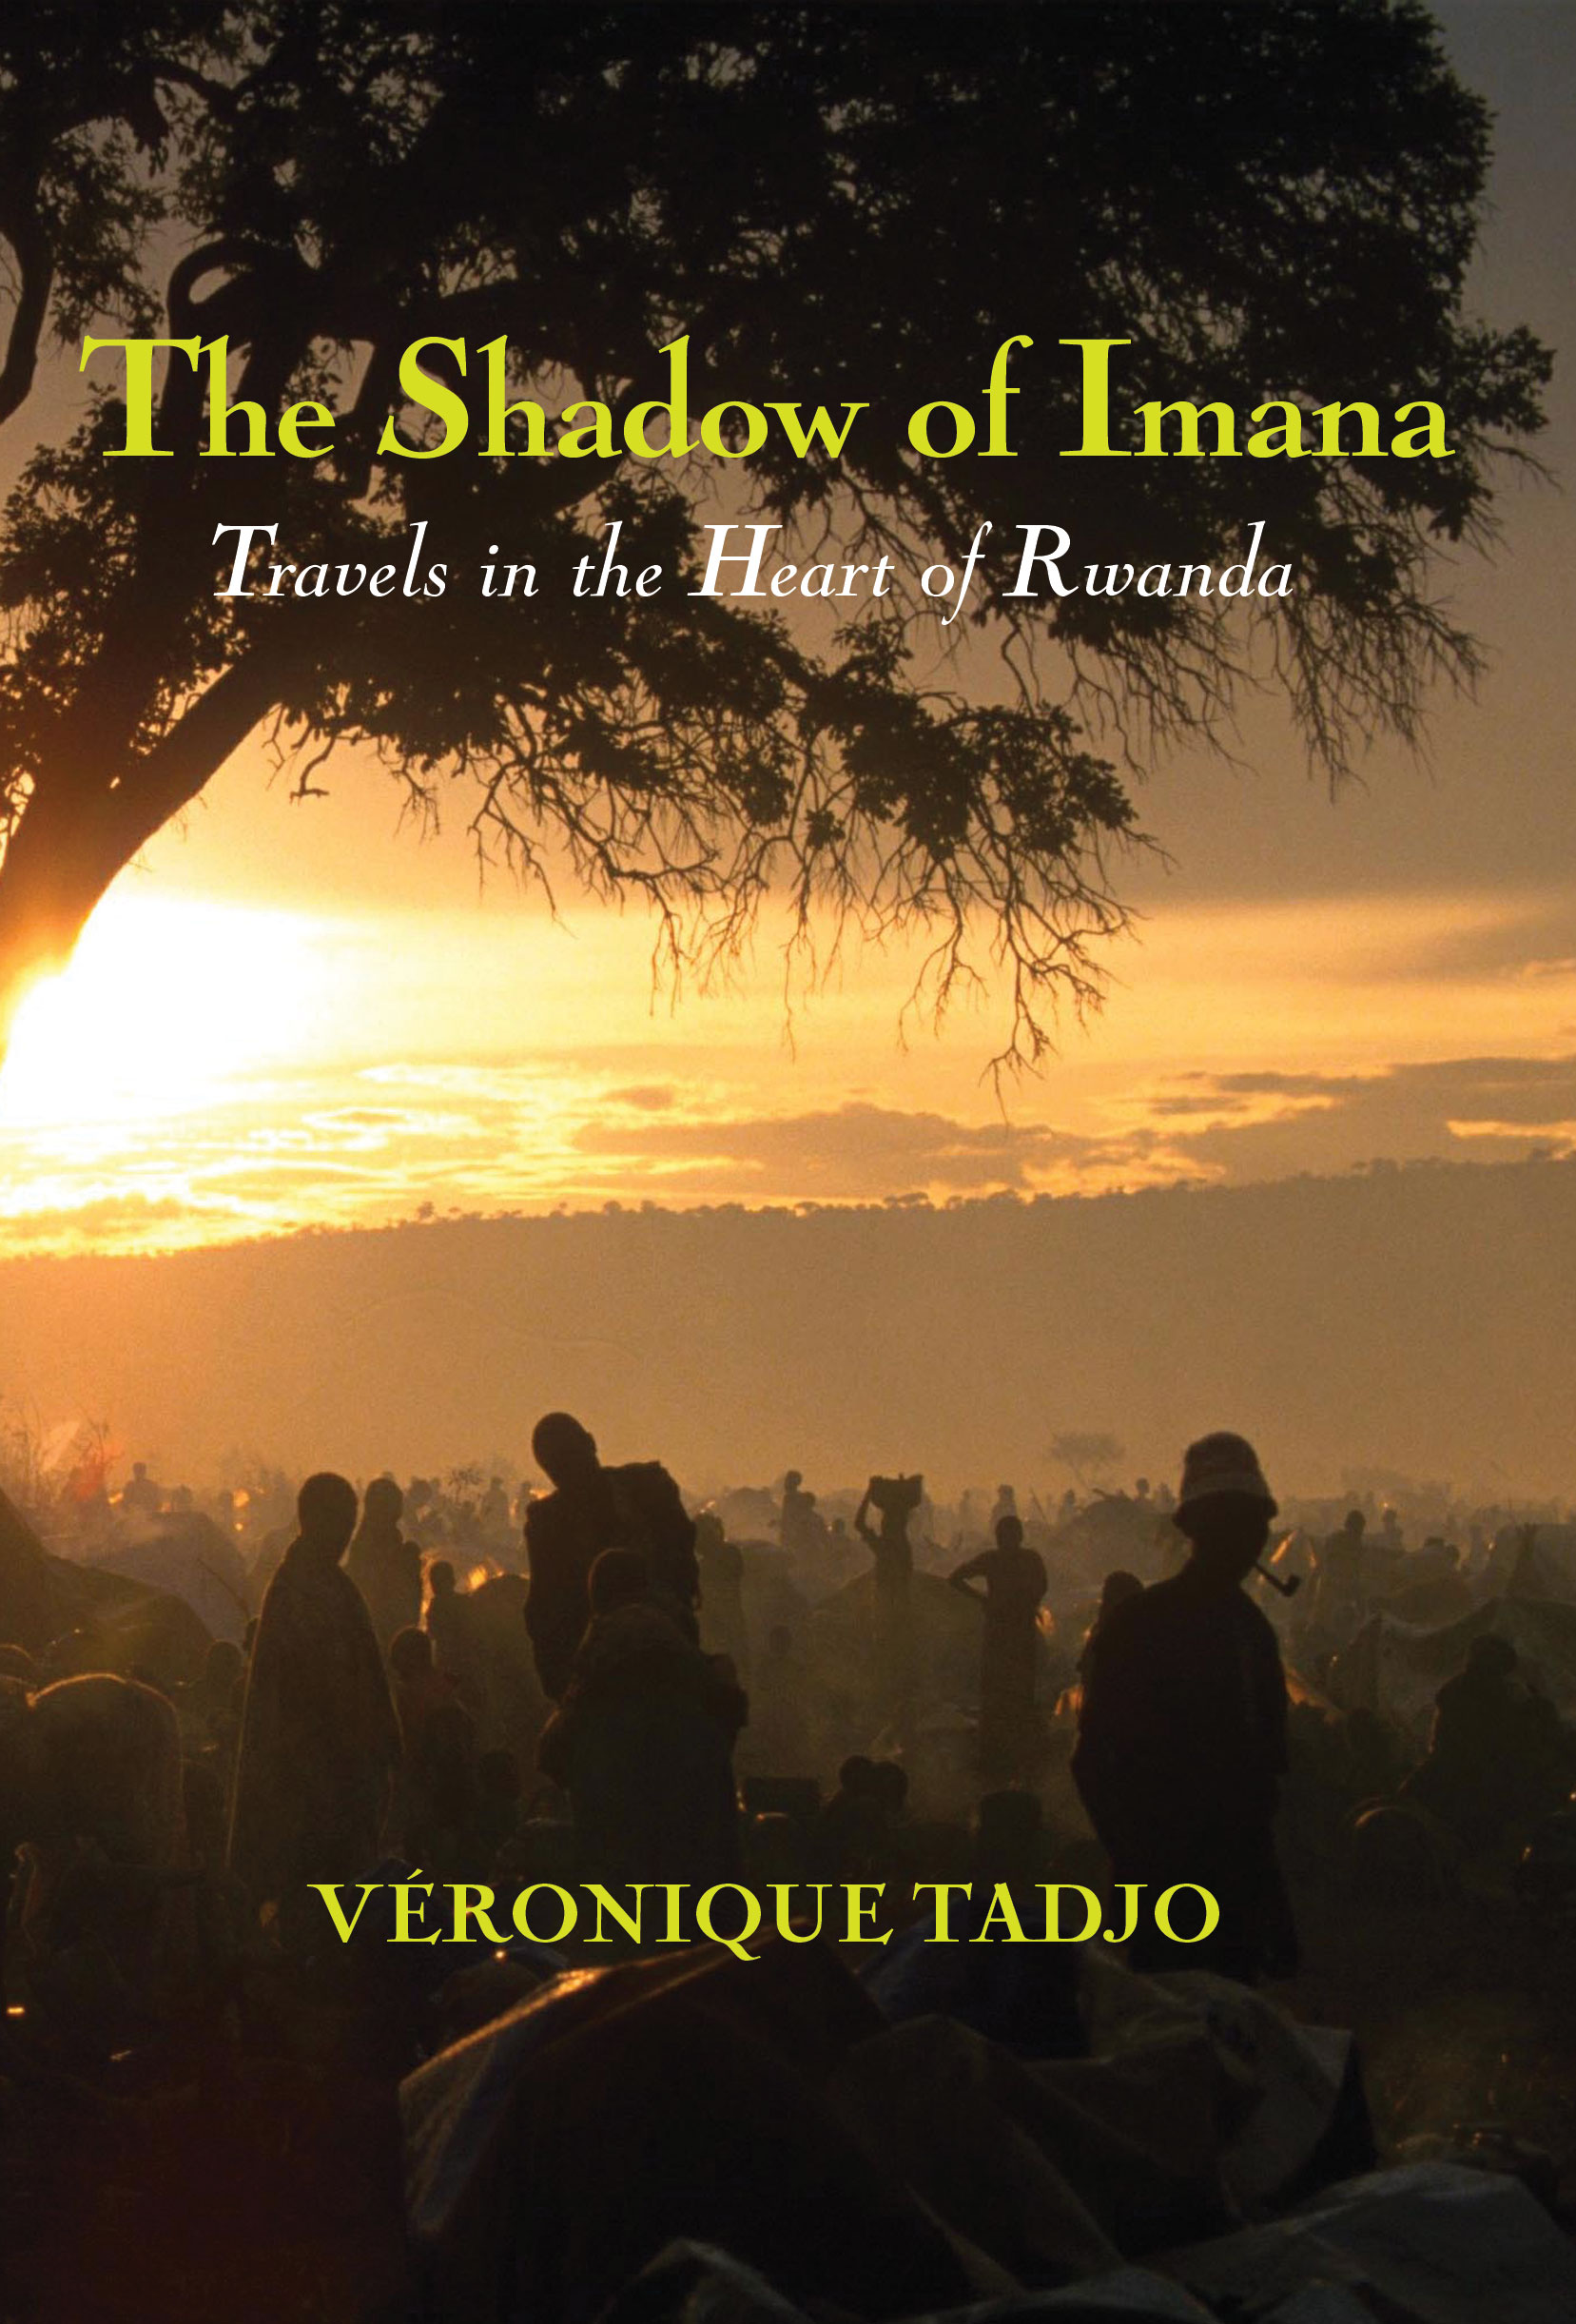 The Shadow of Imana: Travels in the Heart of Rwanda by Véronique  Tadjo (translated by Véronique  Wakerley)